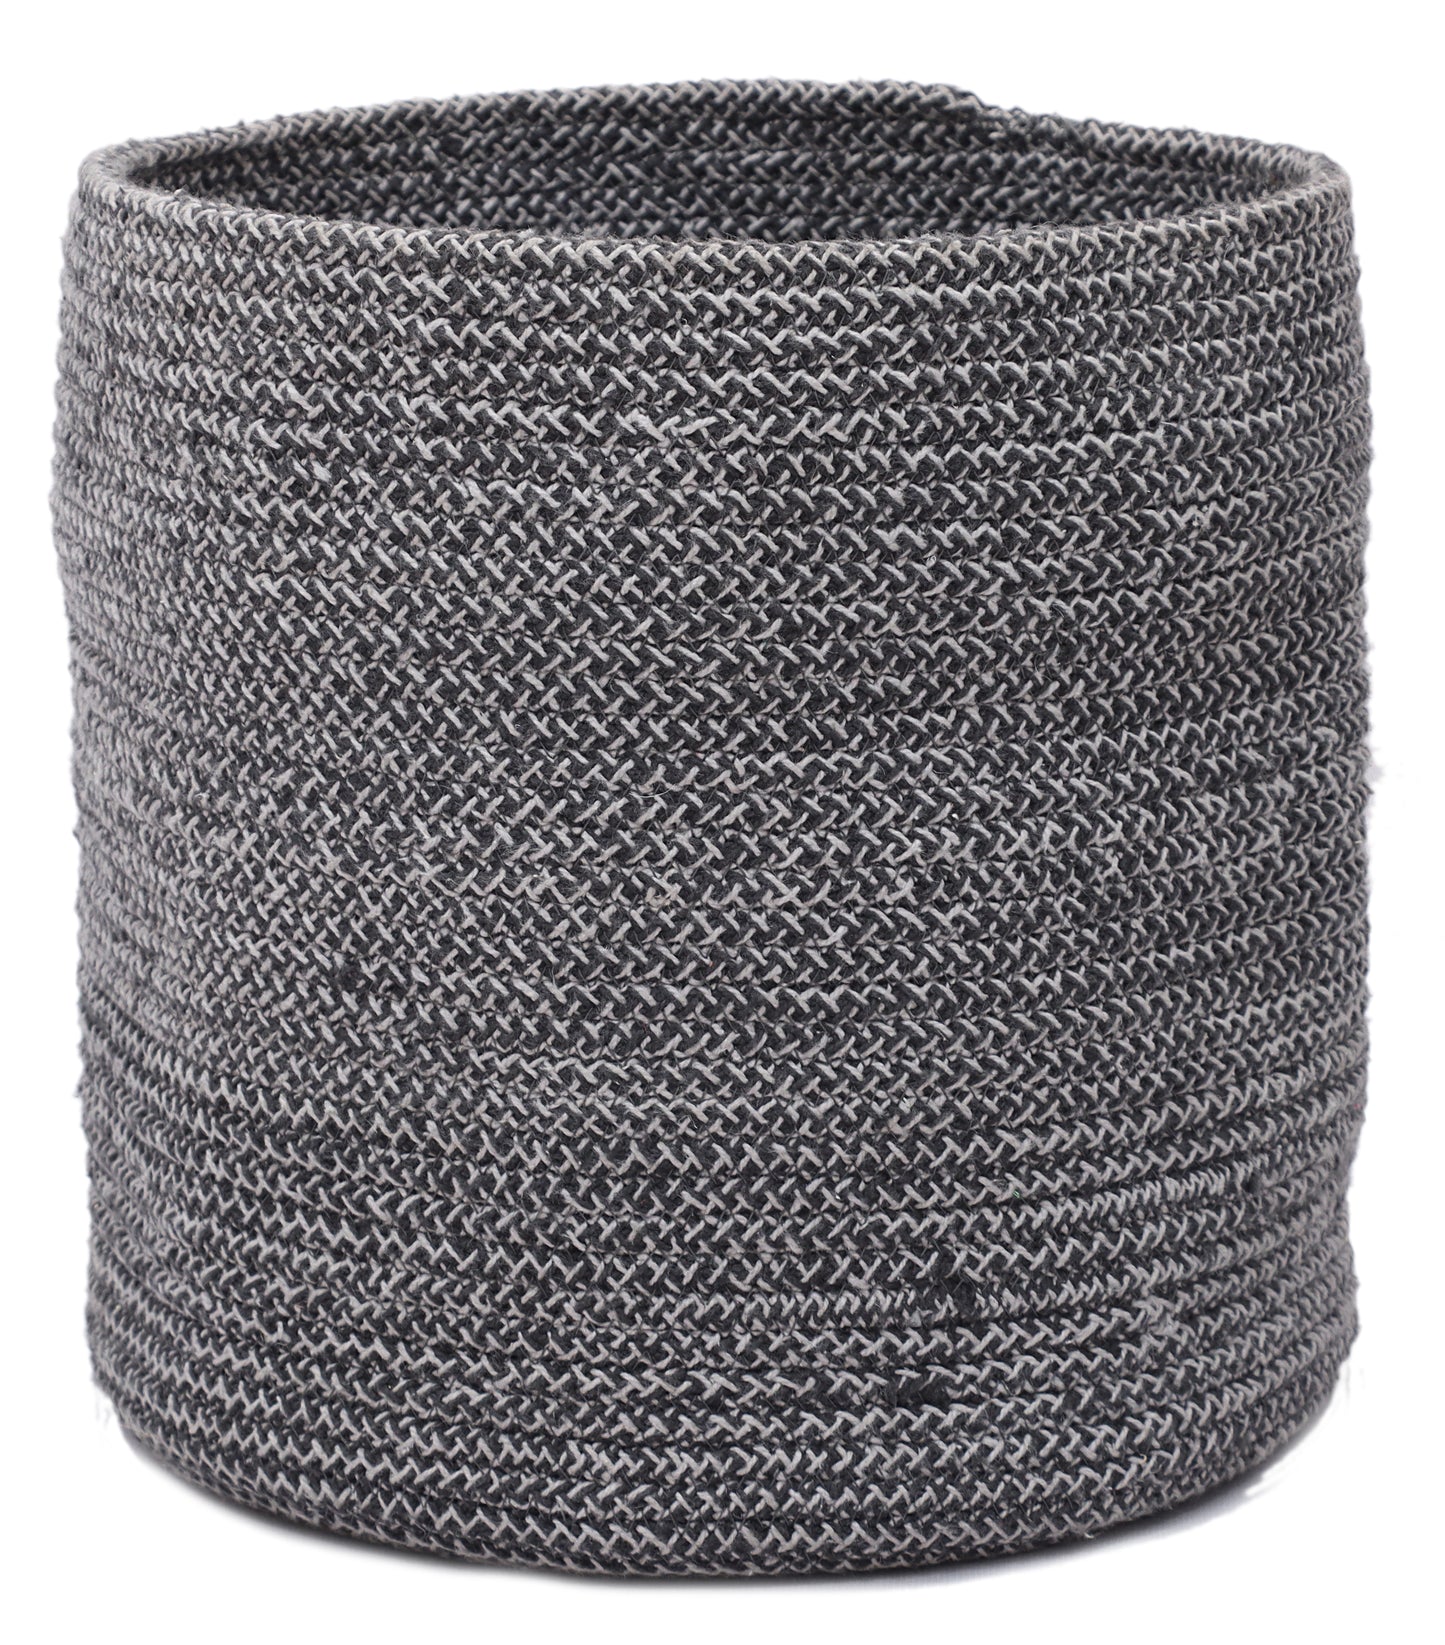 Hand Braided Cotton Basket-Set of 2 (8 Inches)